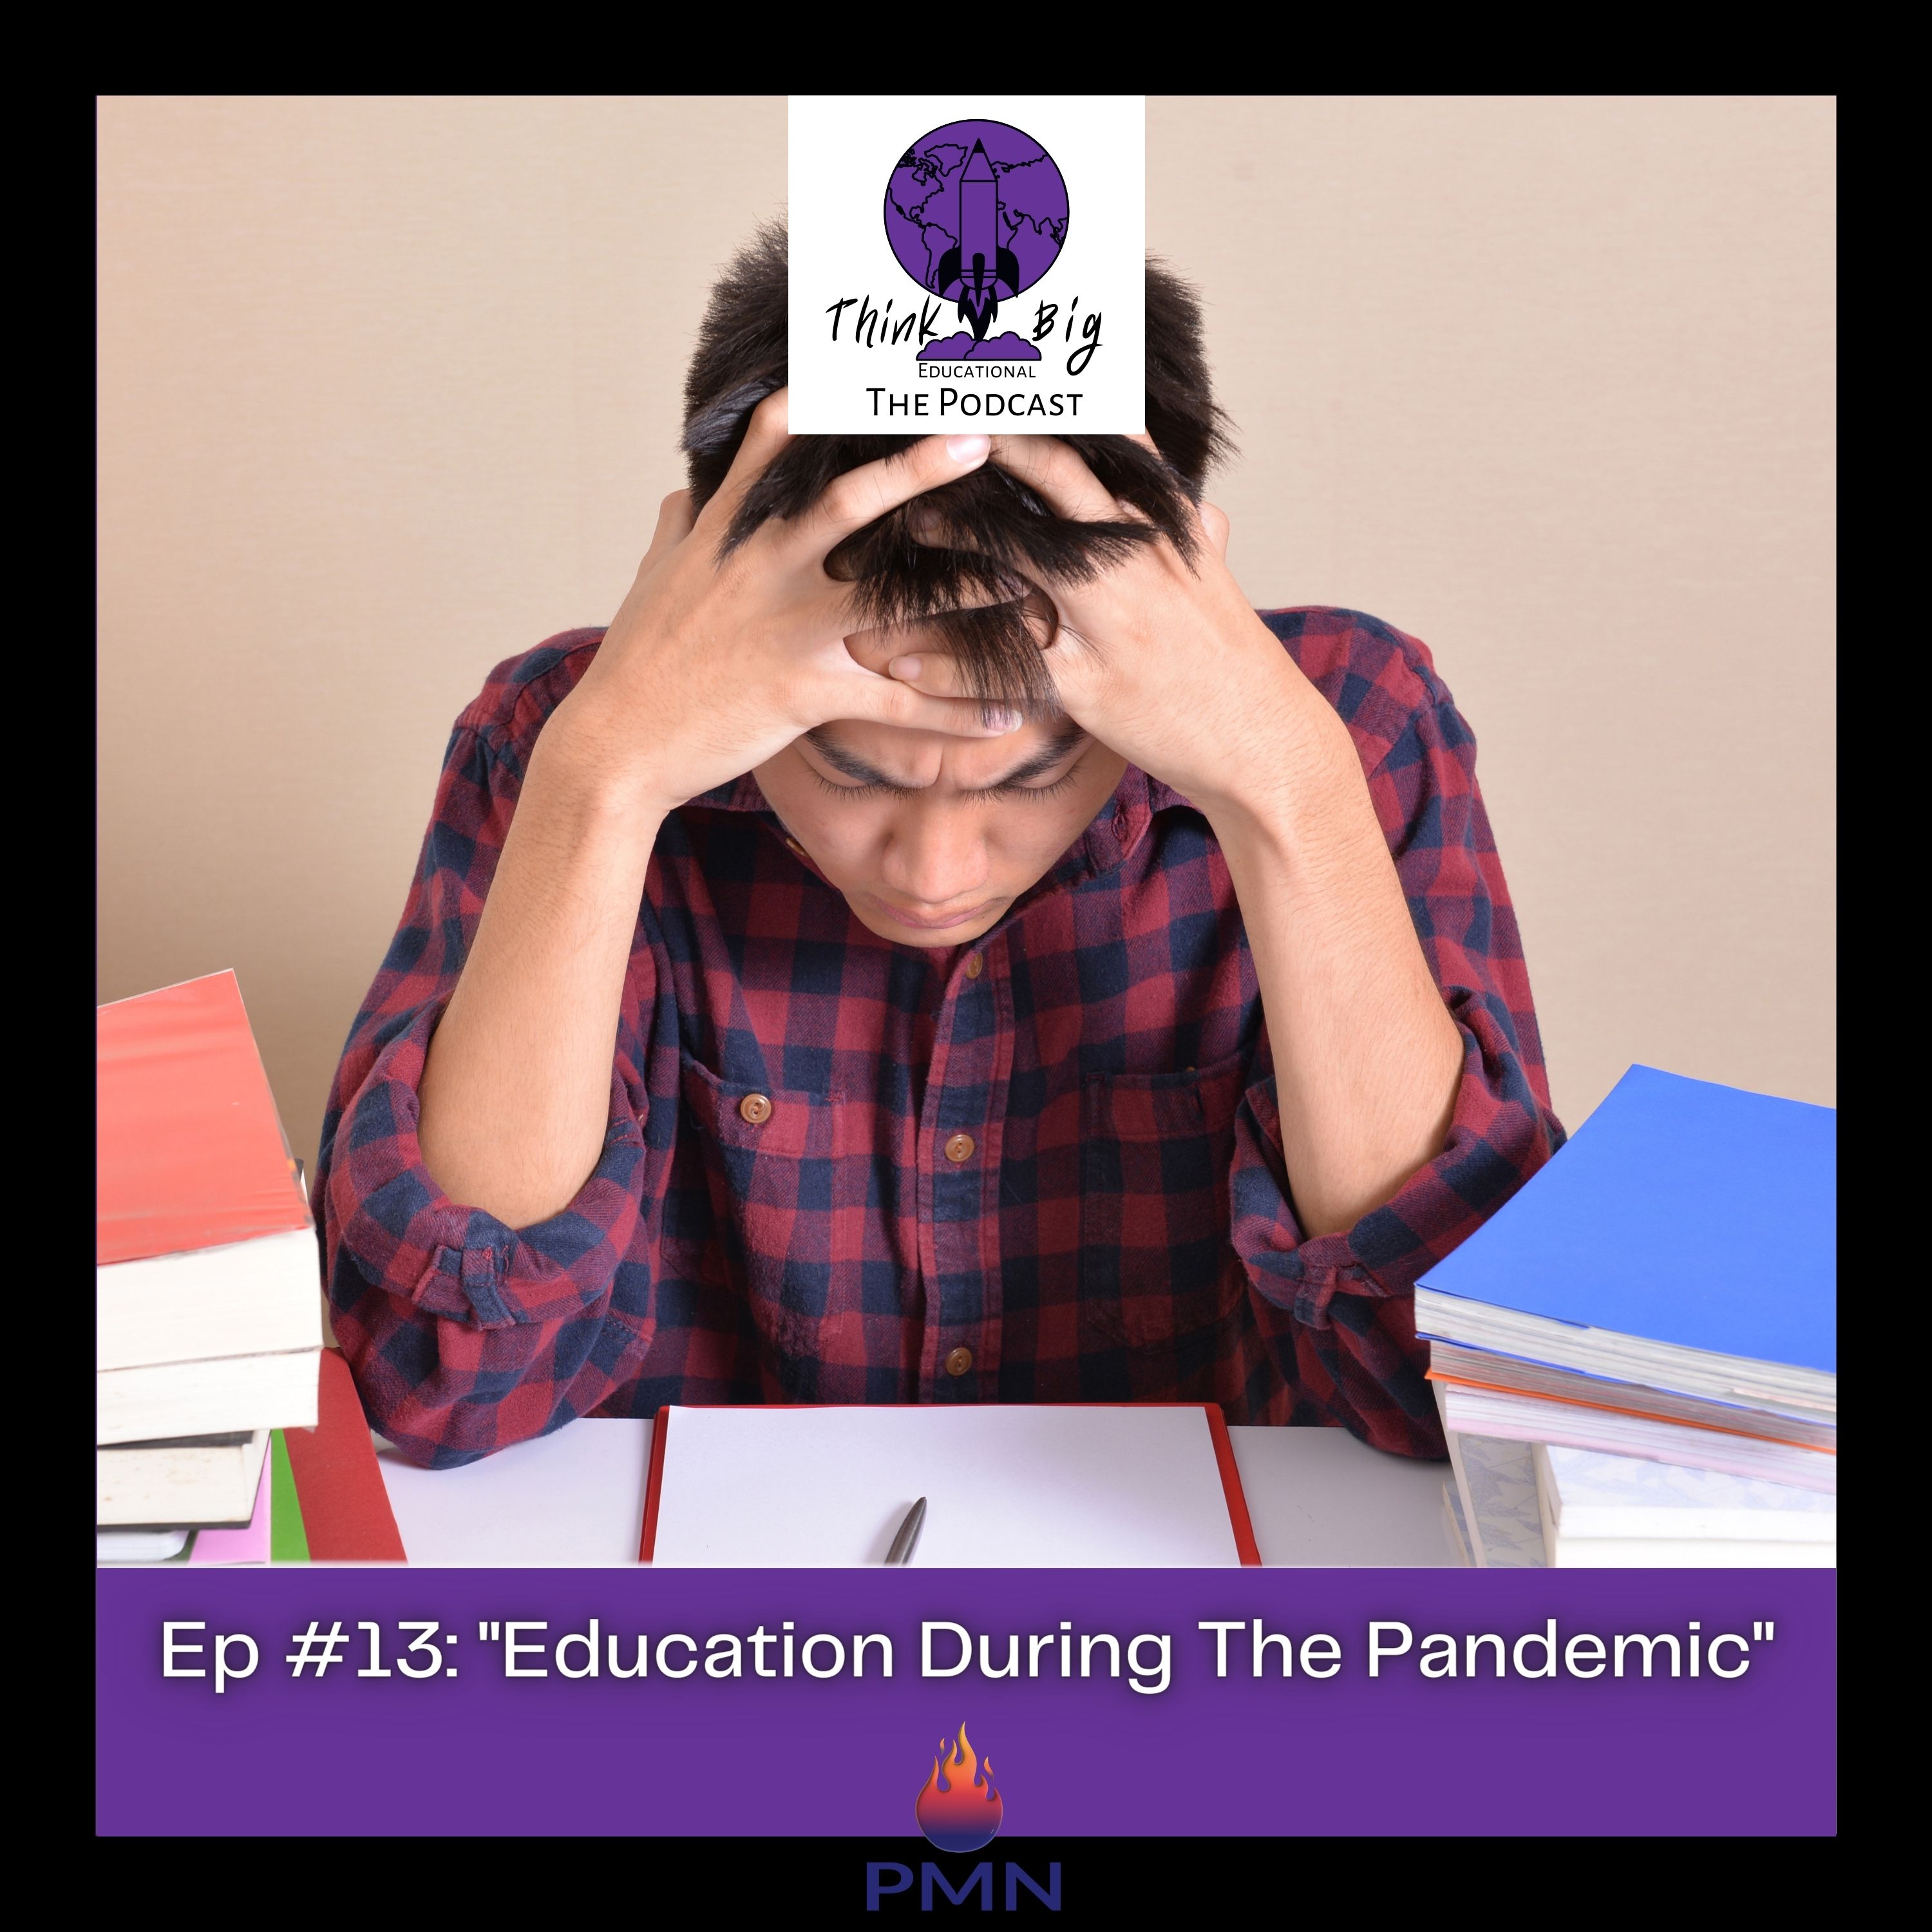 Episode 13: "Education During The Pandemic"